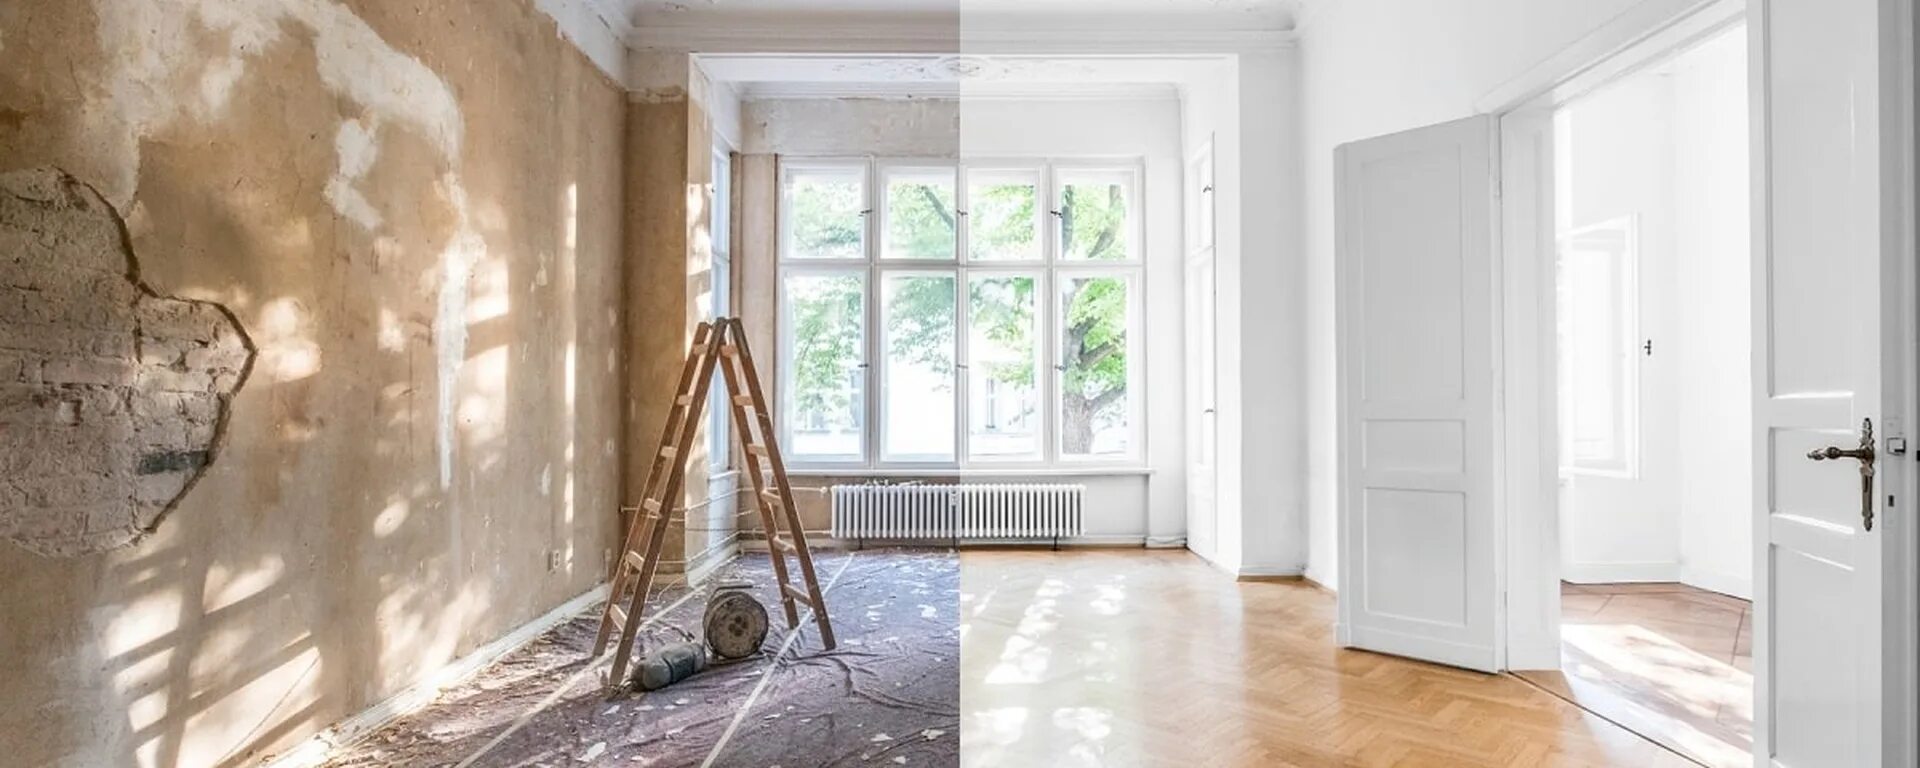 After finishing i. Ремонт в квартире. Ремонт квартир картинки. Apartment Renovation before after. Ремонт квартир картинки для сайта.